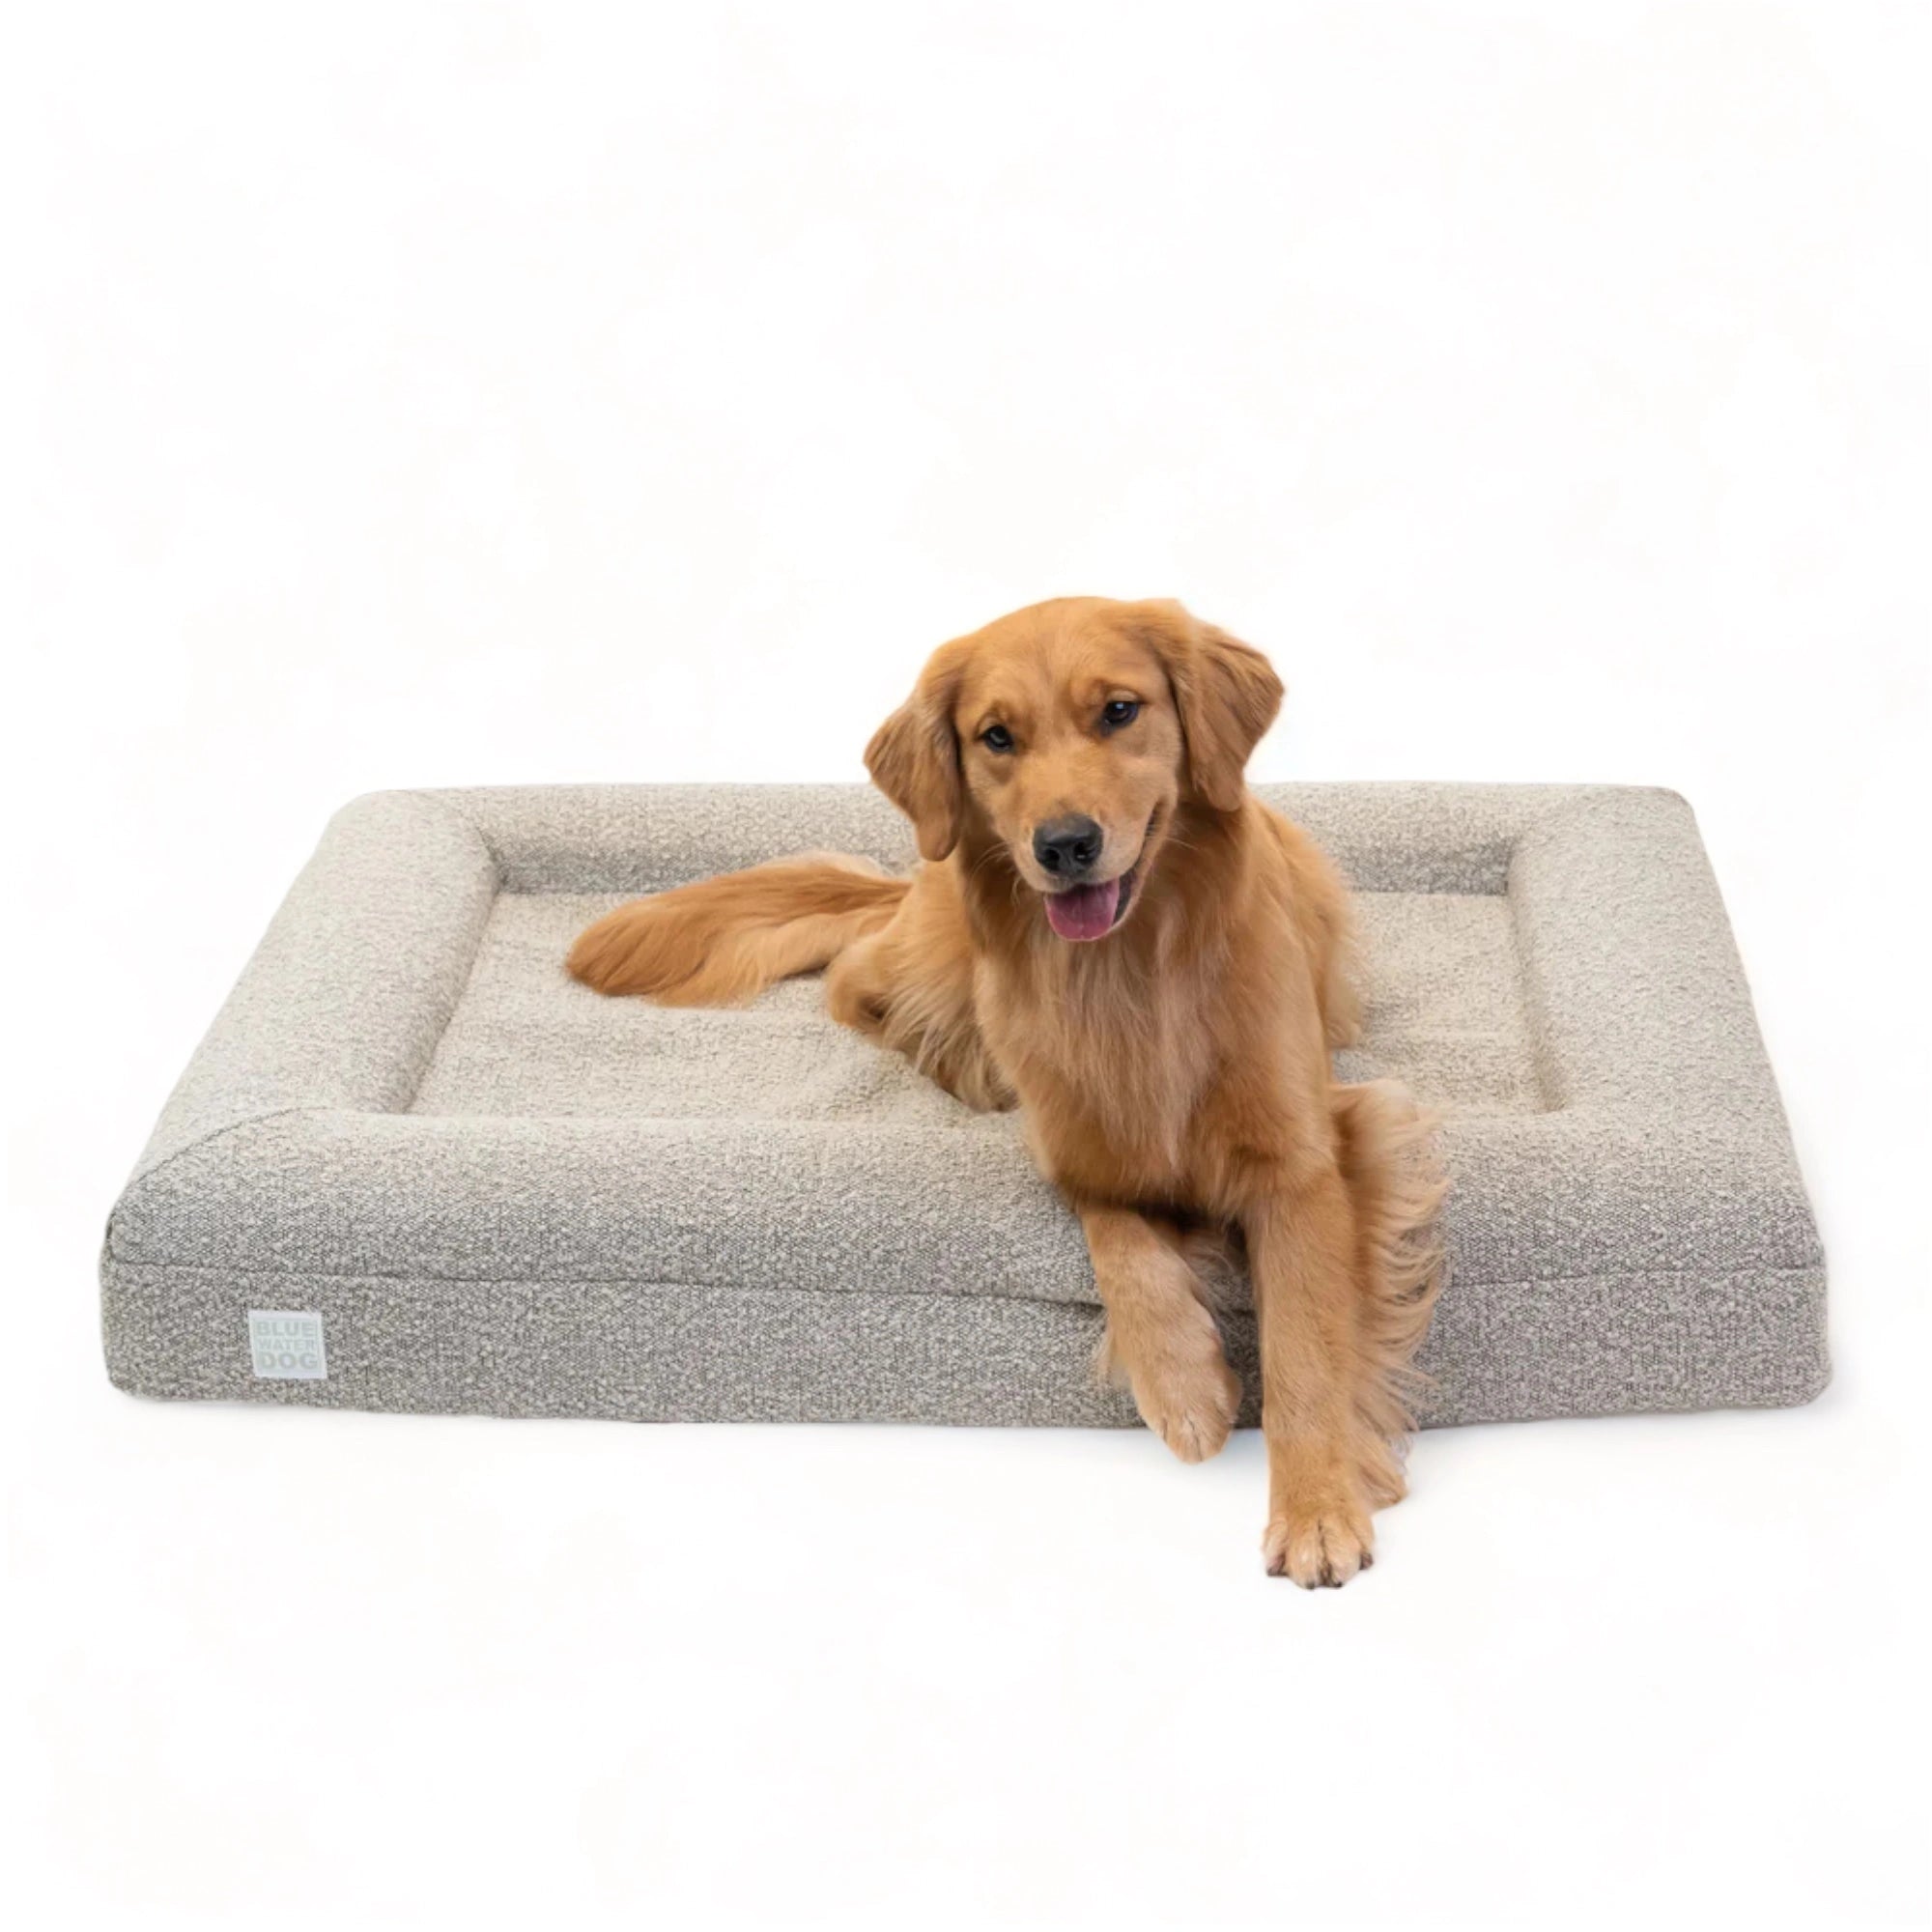 Golden Retriever laying on a large, sand-colored orthopedic memory foam rectangular boucle dog bed with bolsters.